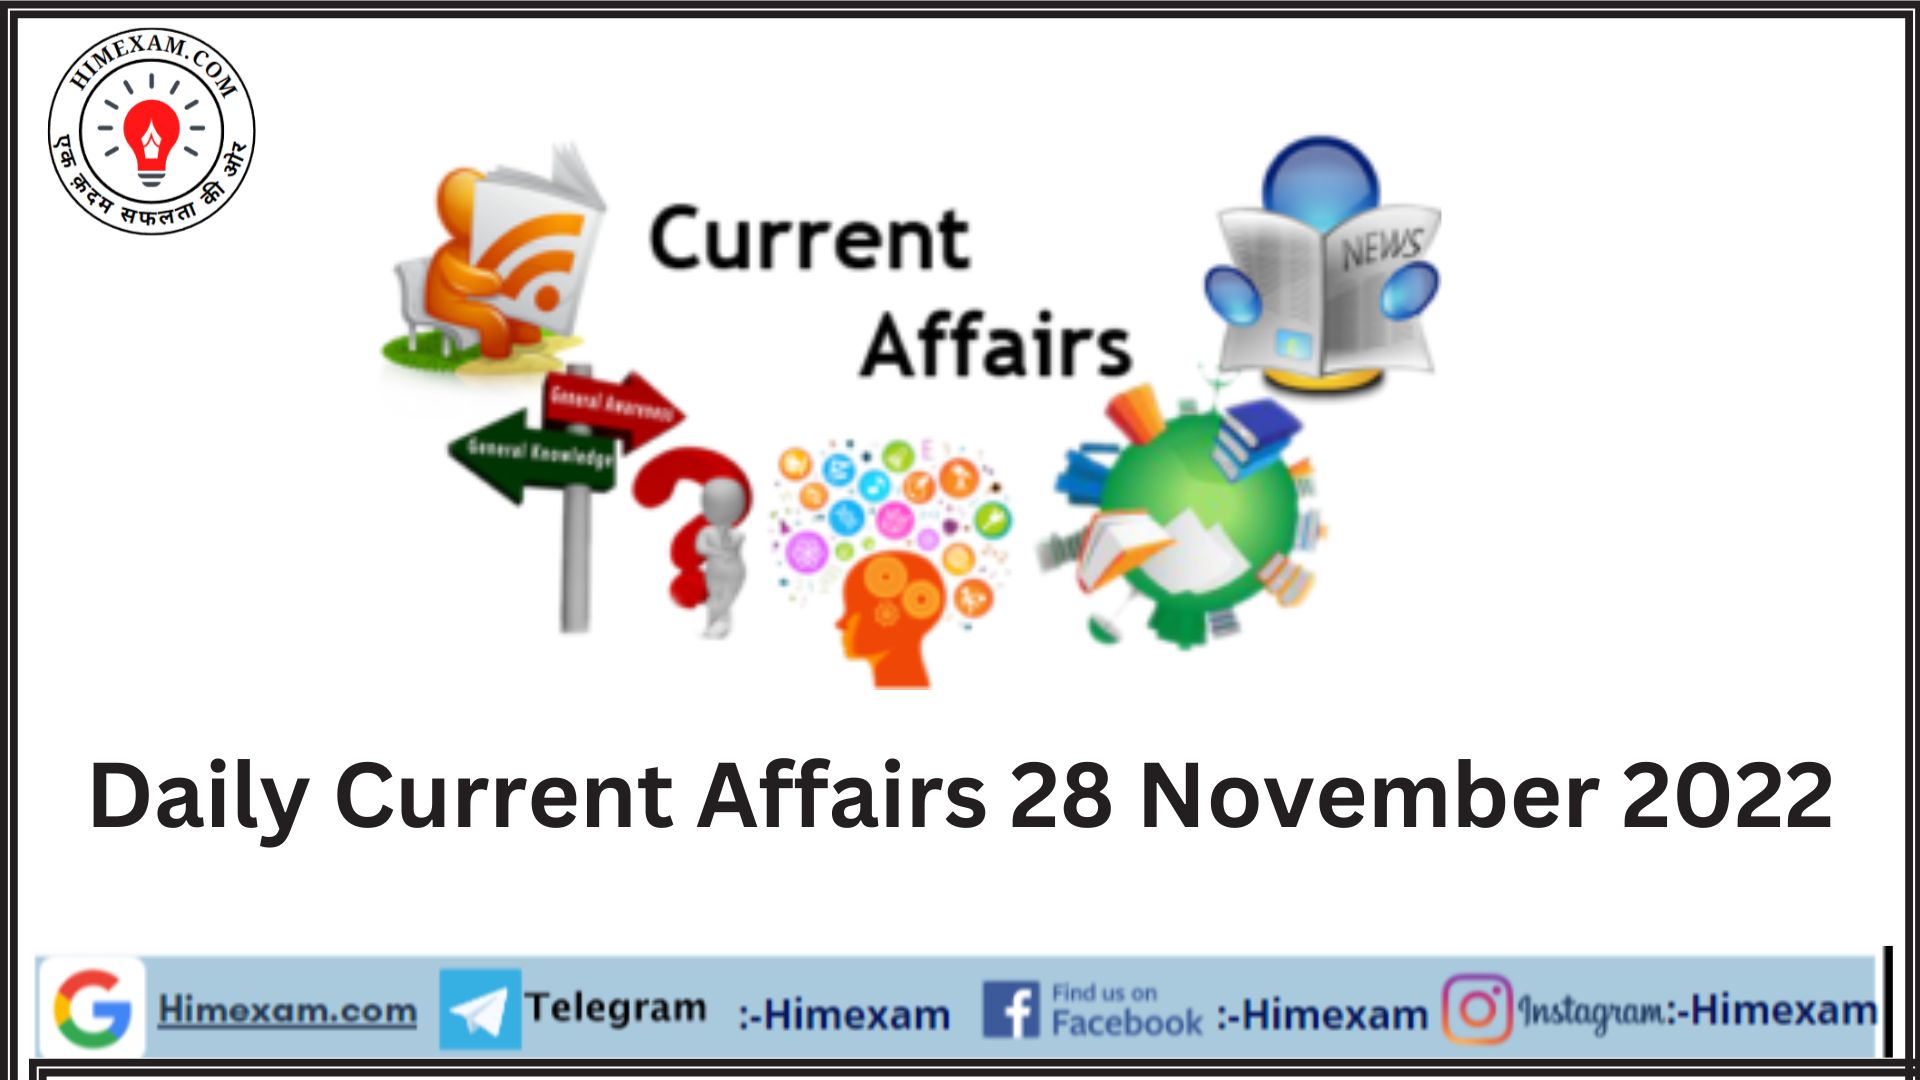 Daily Current Affairs 28 November 2022